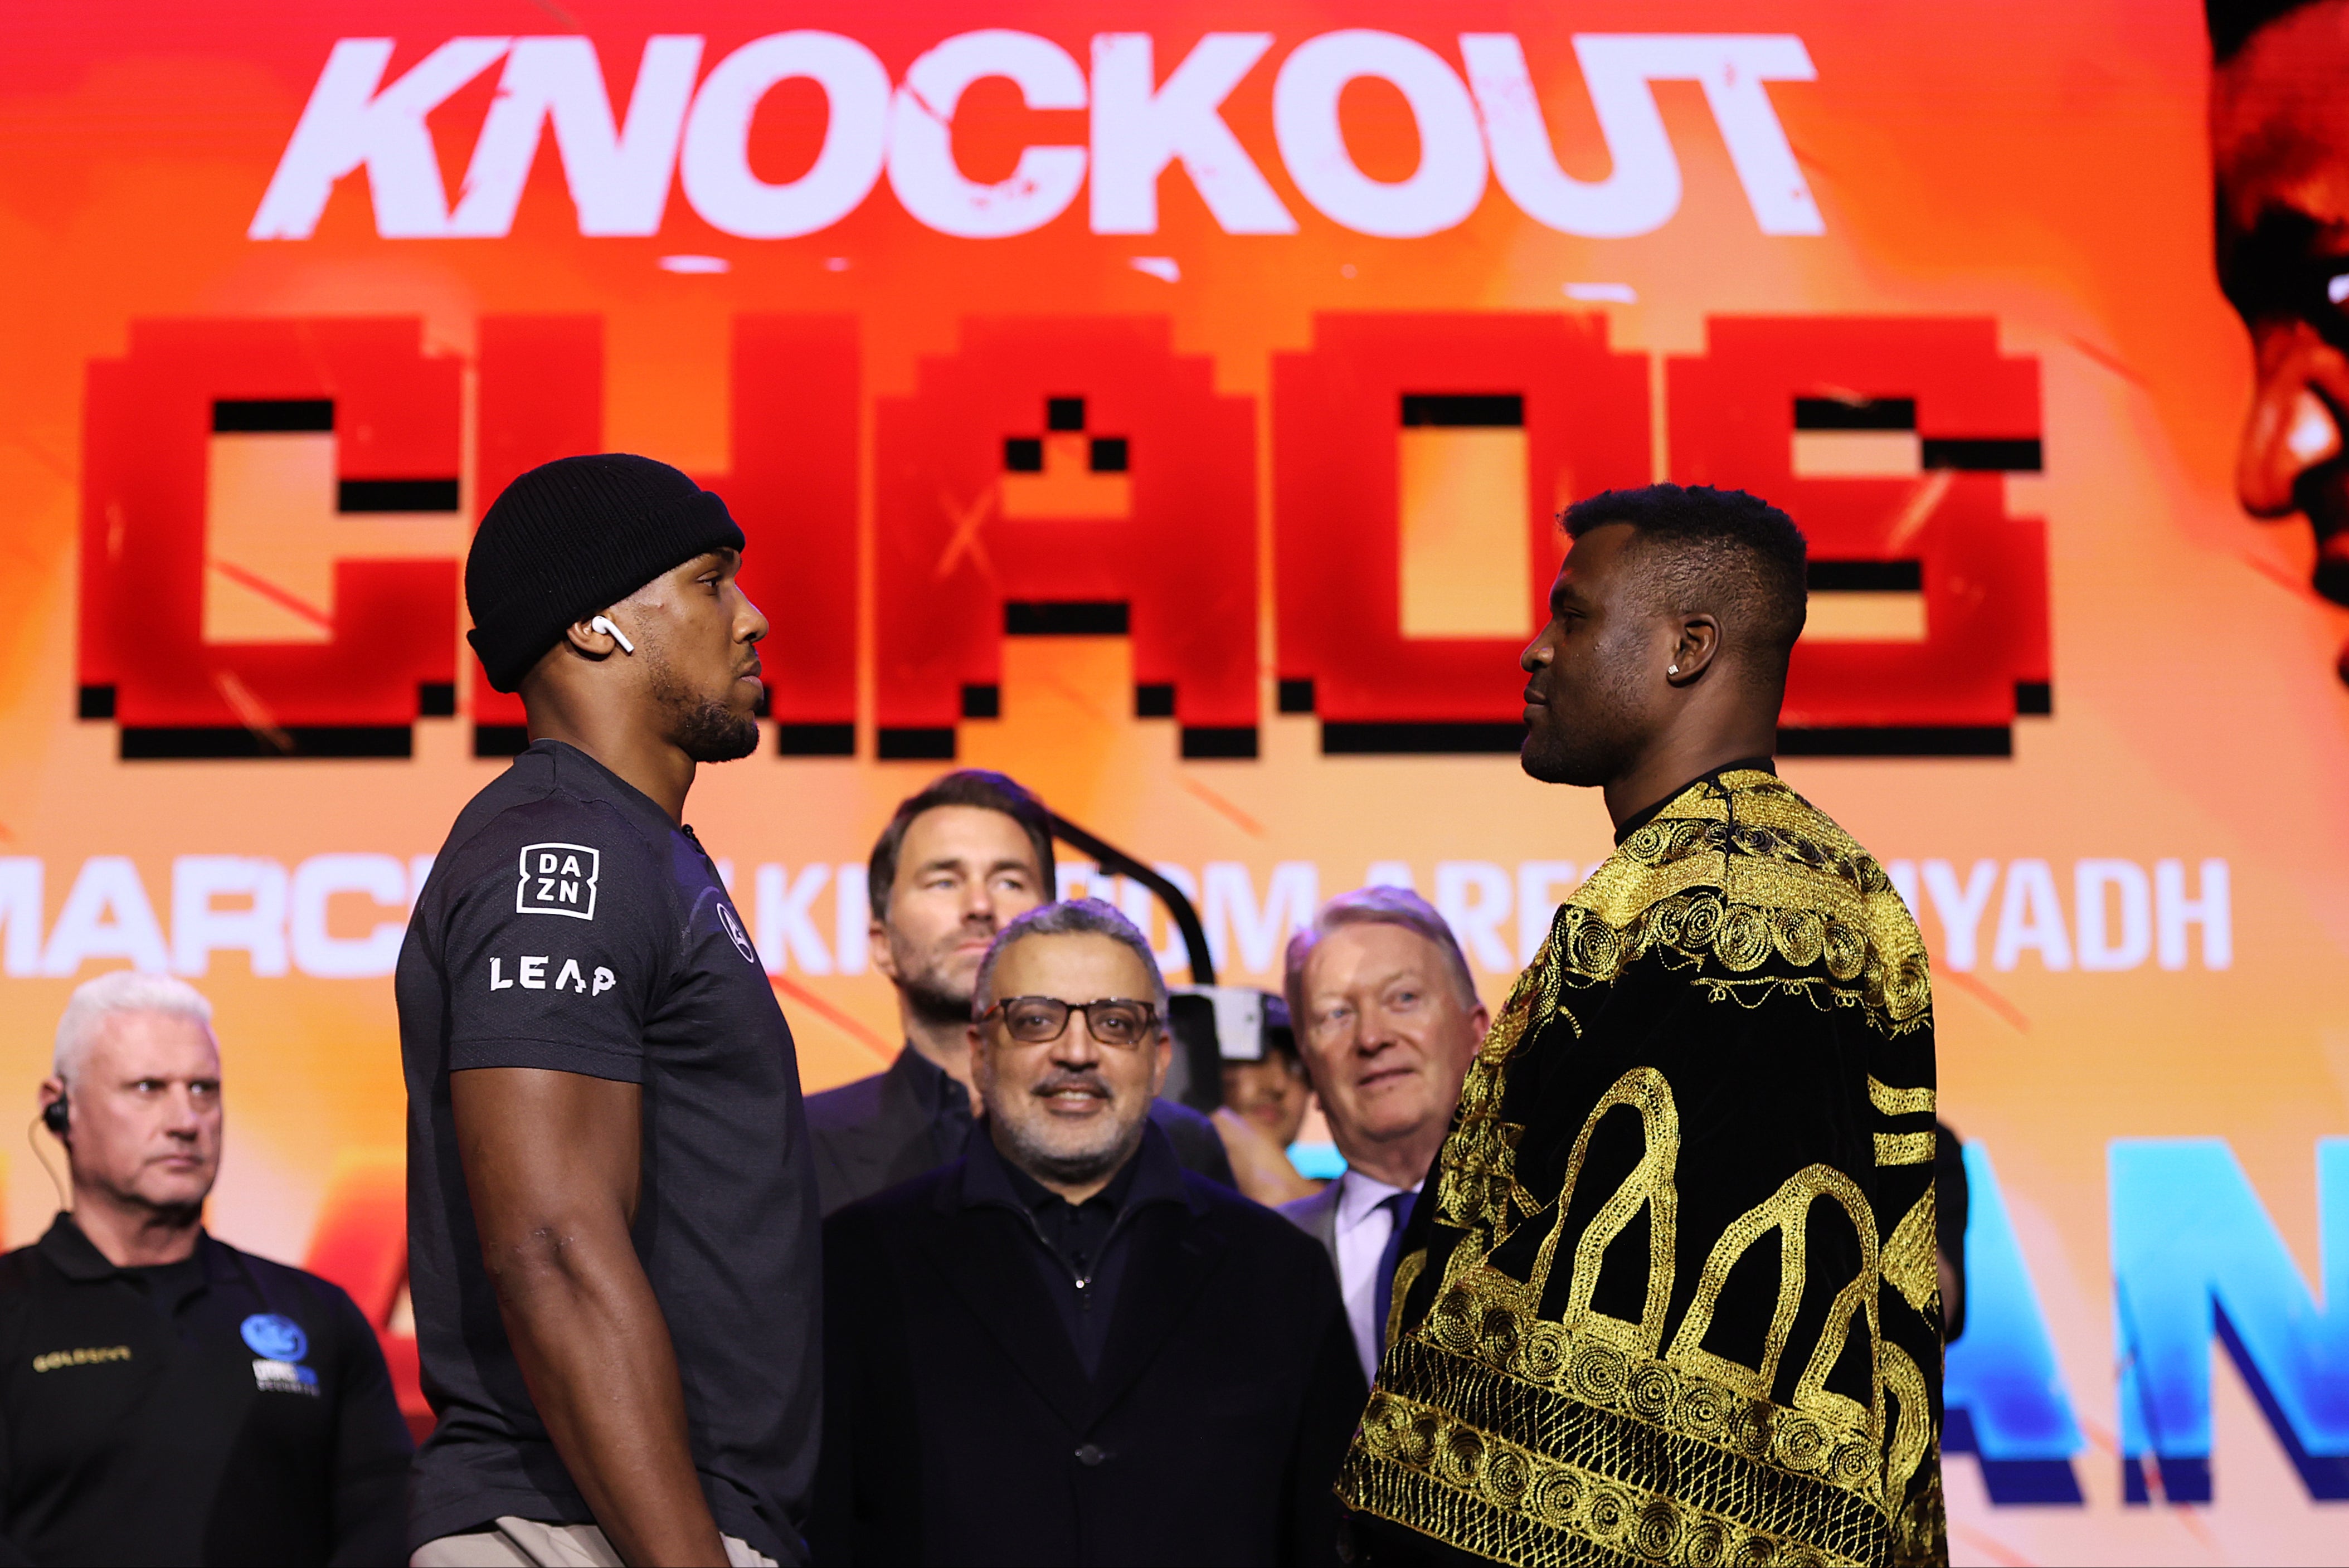 Joshua faces off with Francis Ngannou